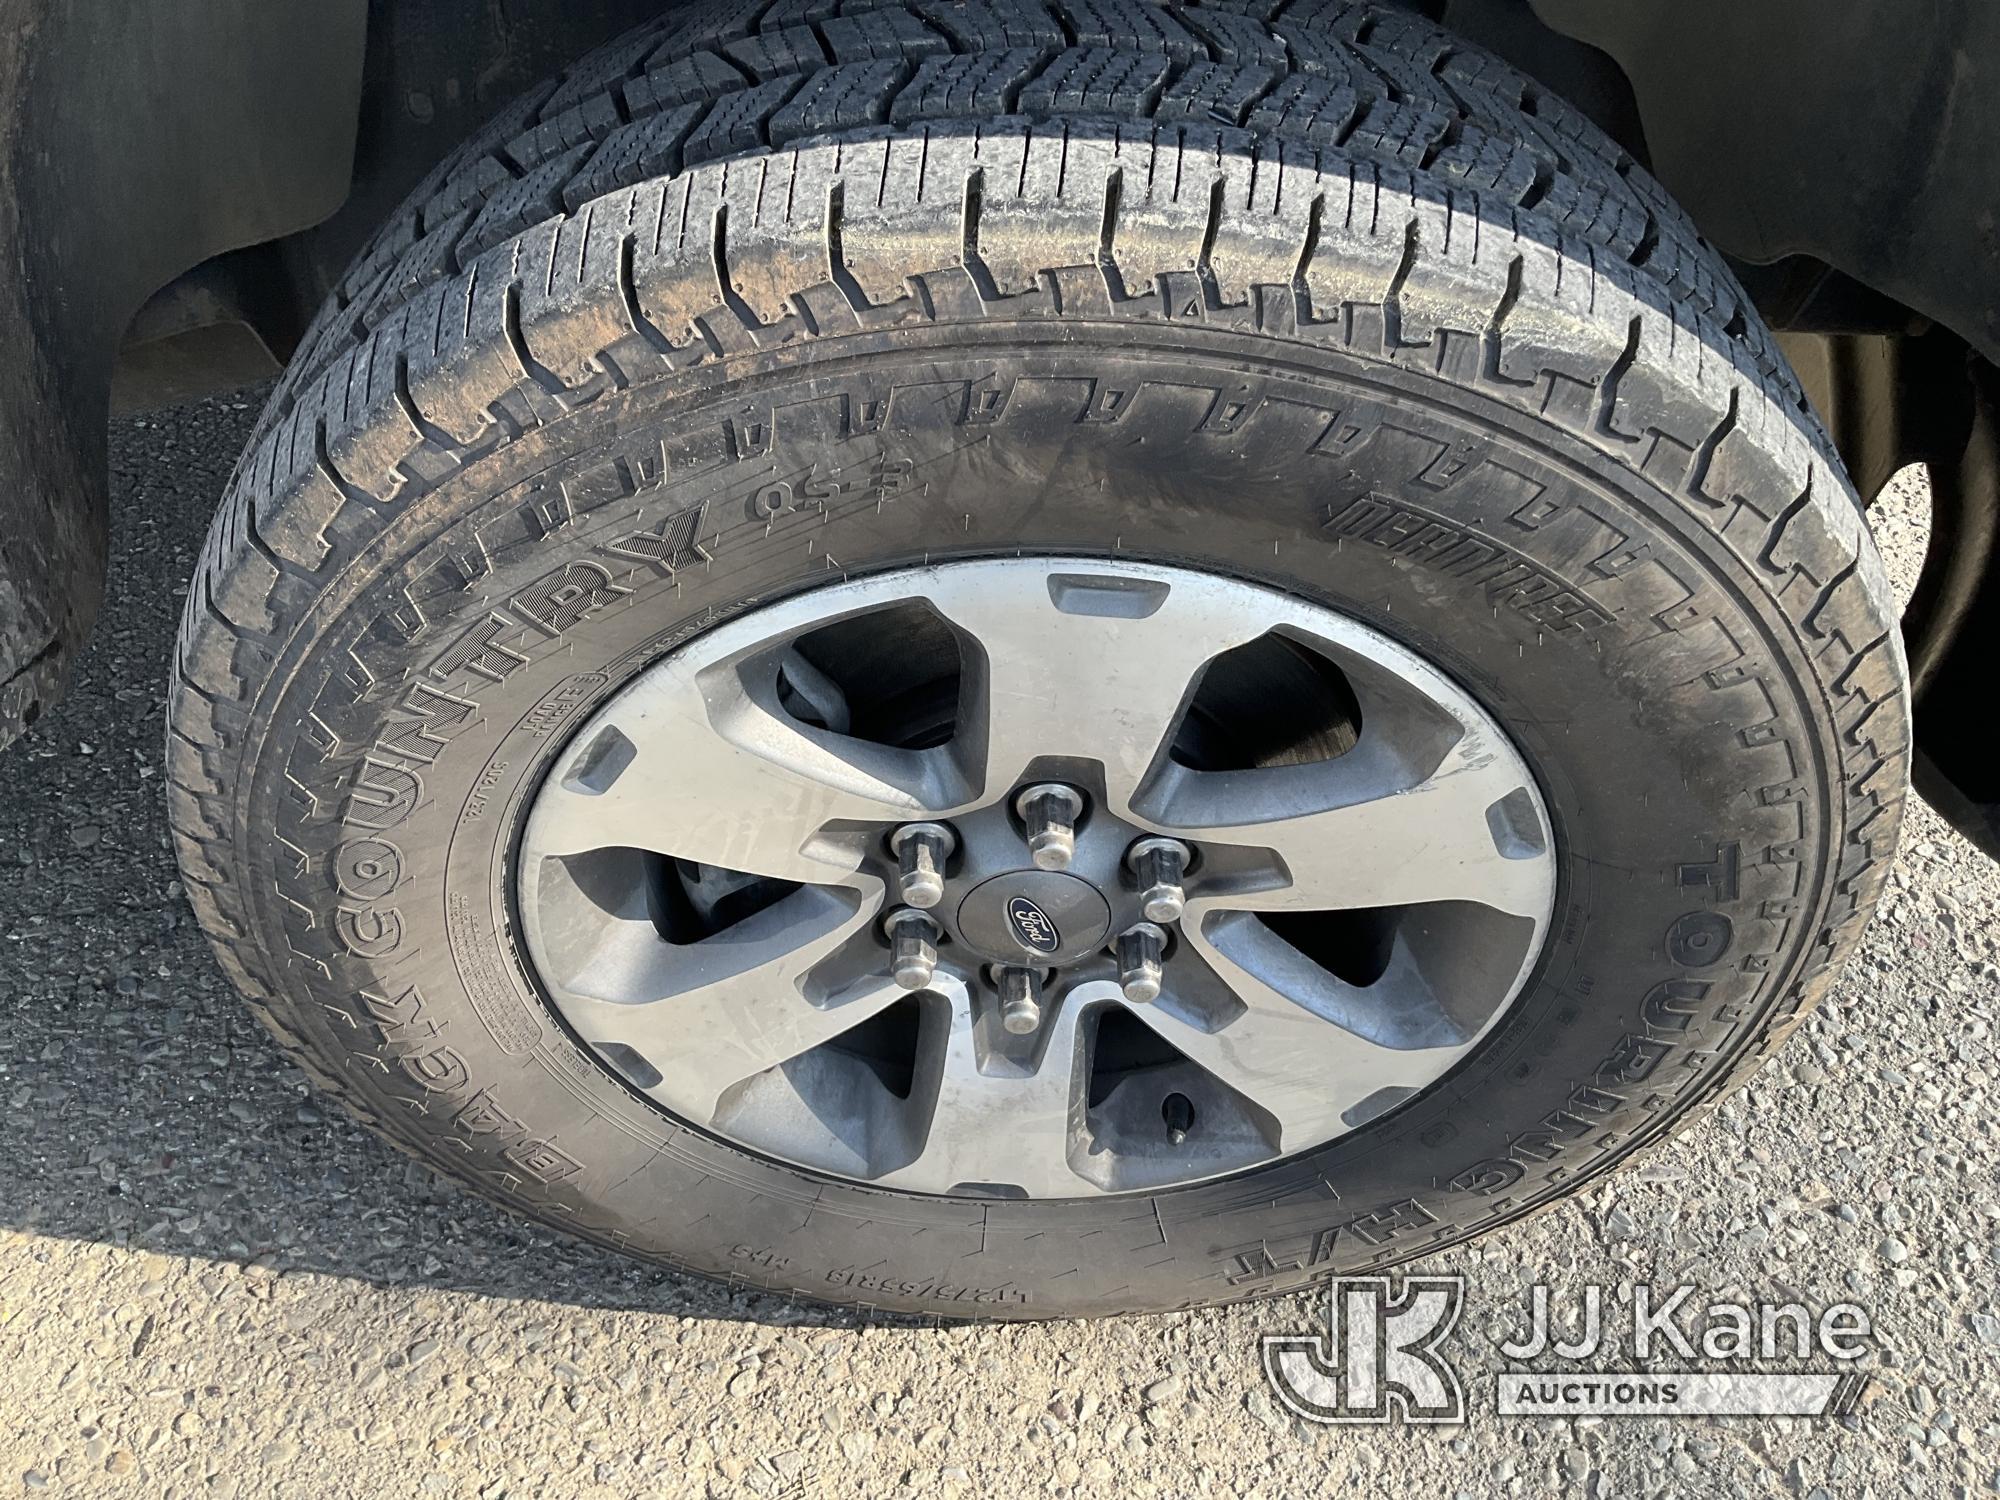 (Dixon, CA) 2014 Ford F150 4x4 Extended-Cab Pickup Truck Runs & Moves, Low Speed Grinding Noise, Tra